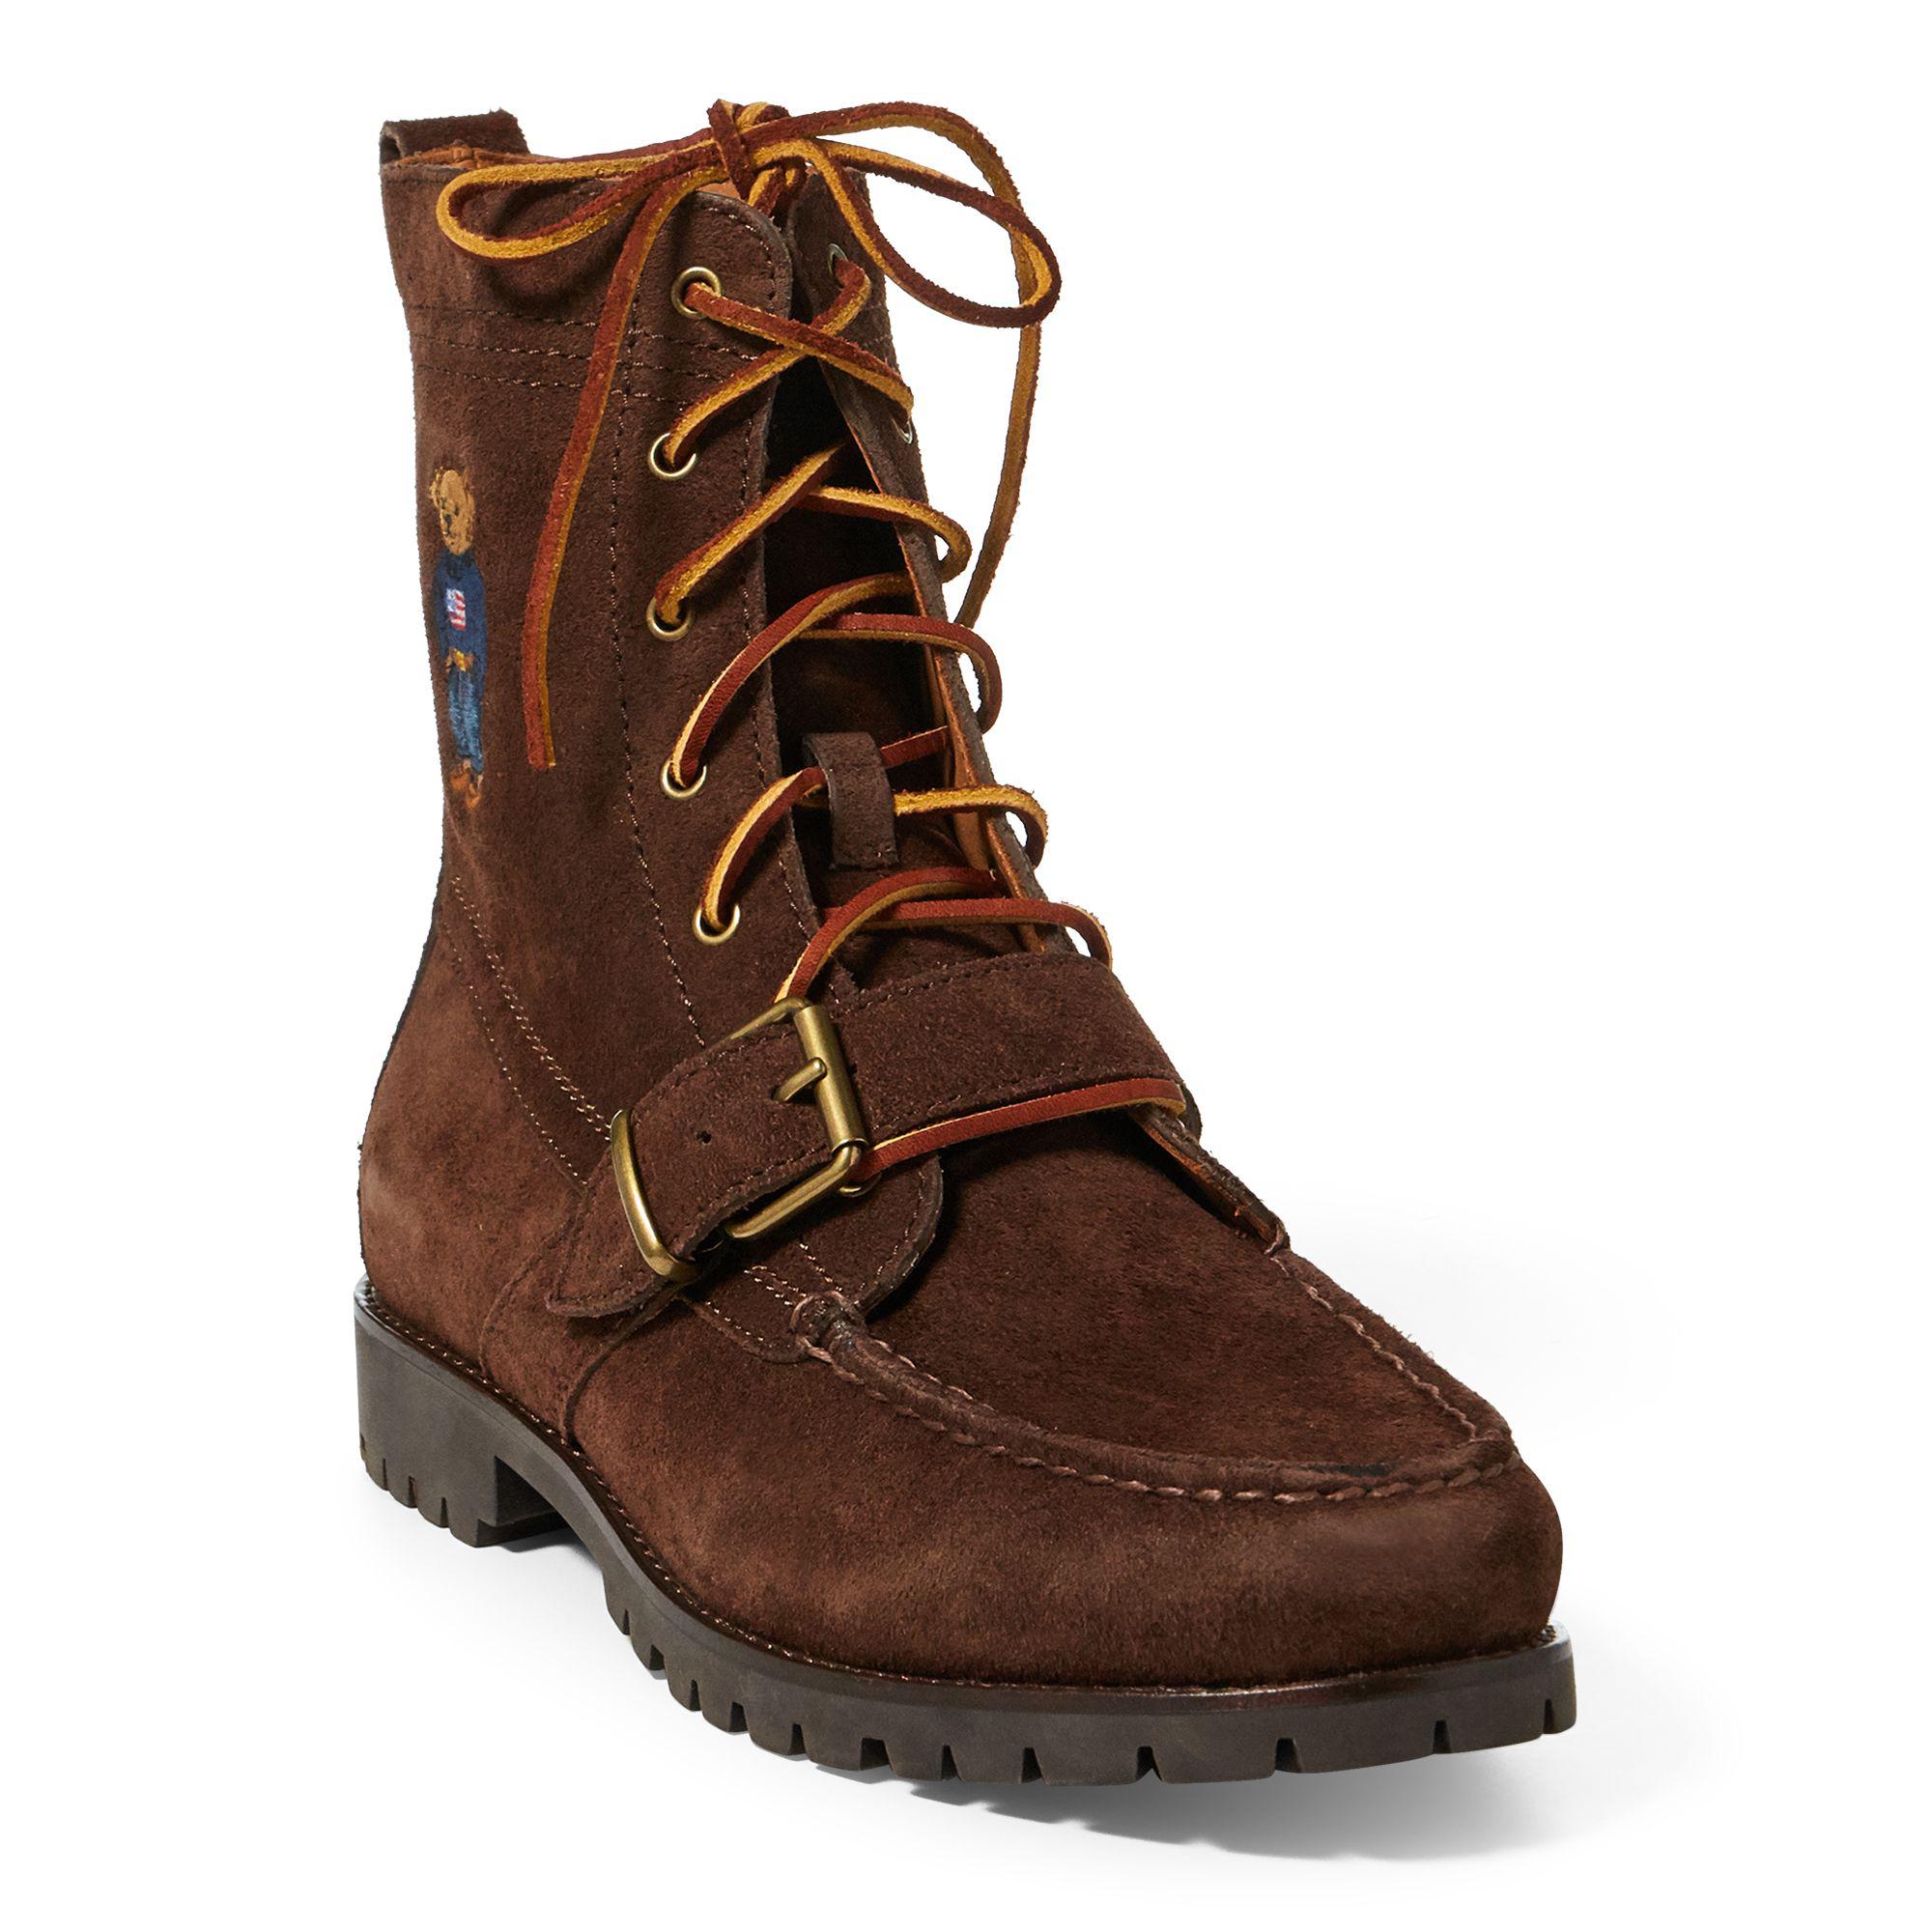 Lyst - Polo Ralph Lauren Ranger Polo Bear Suede Boot in Brown for Men